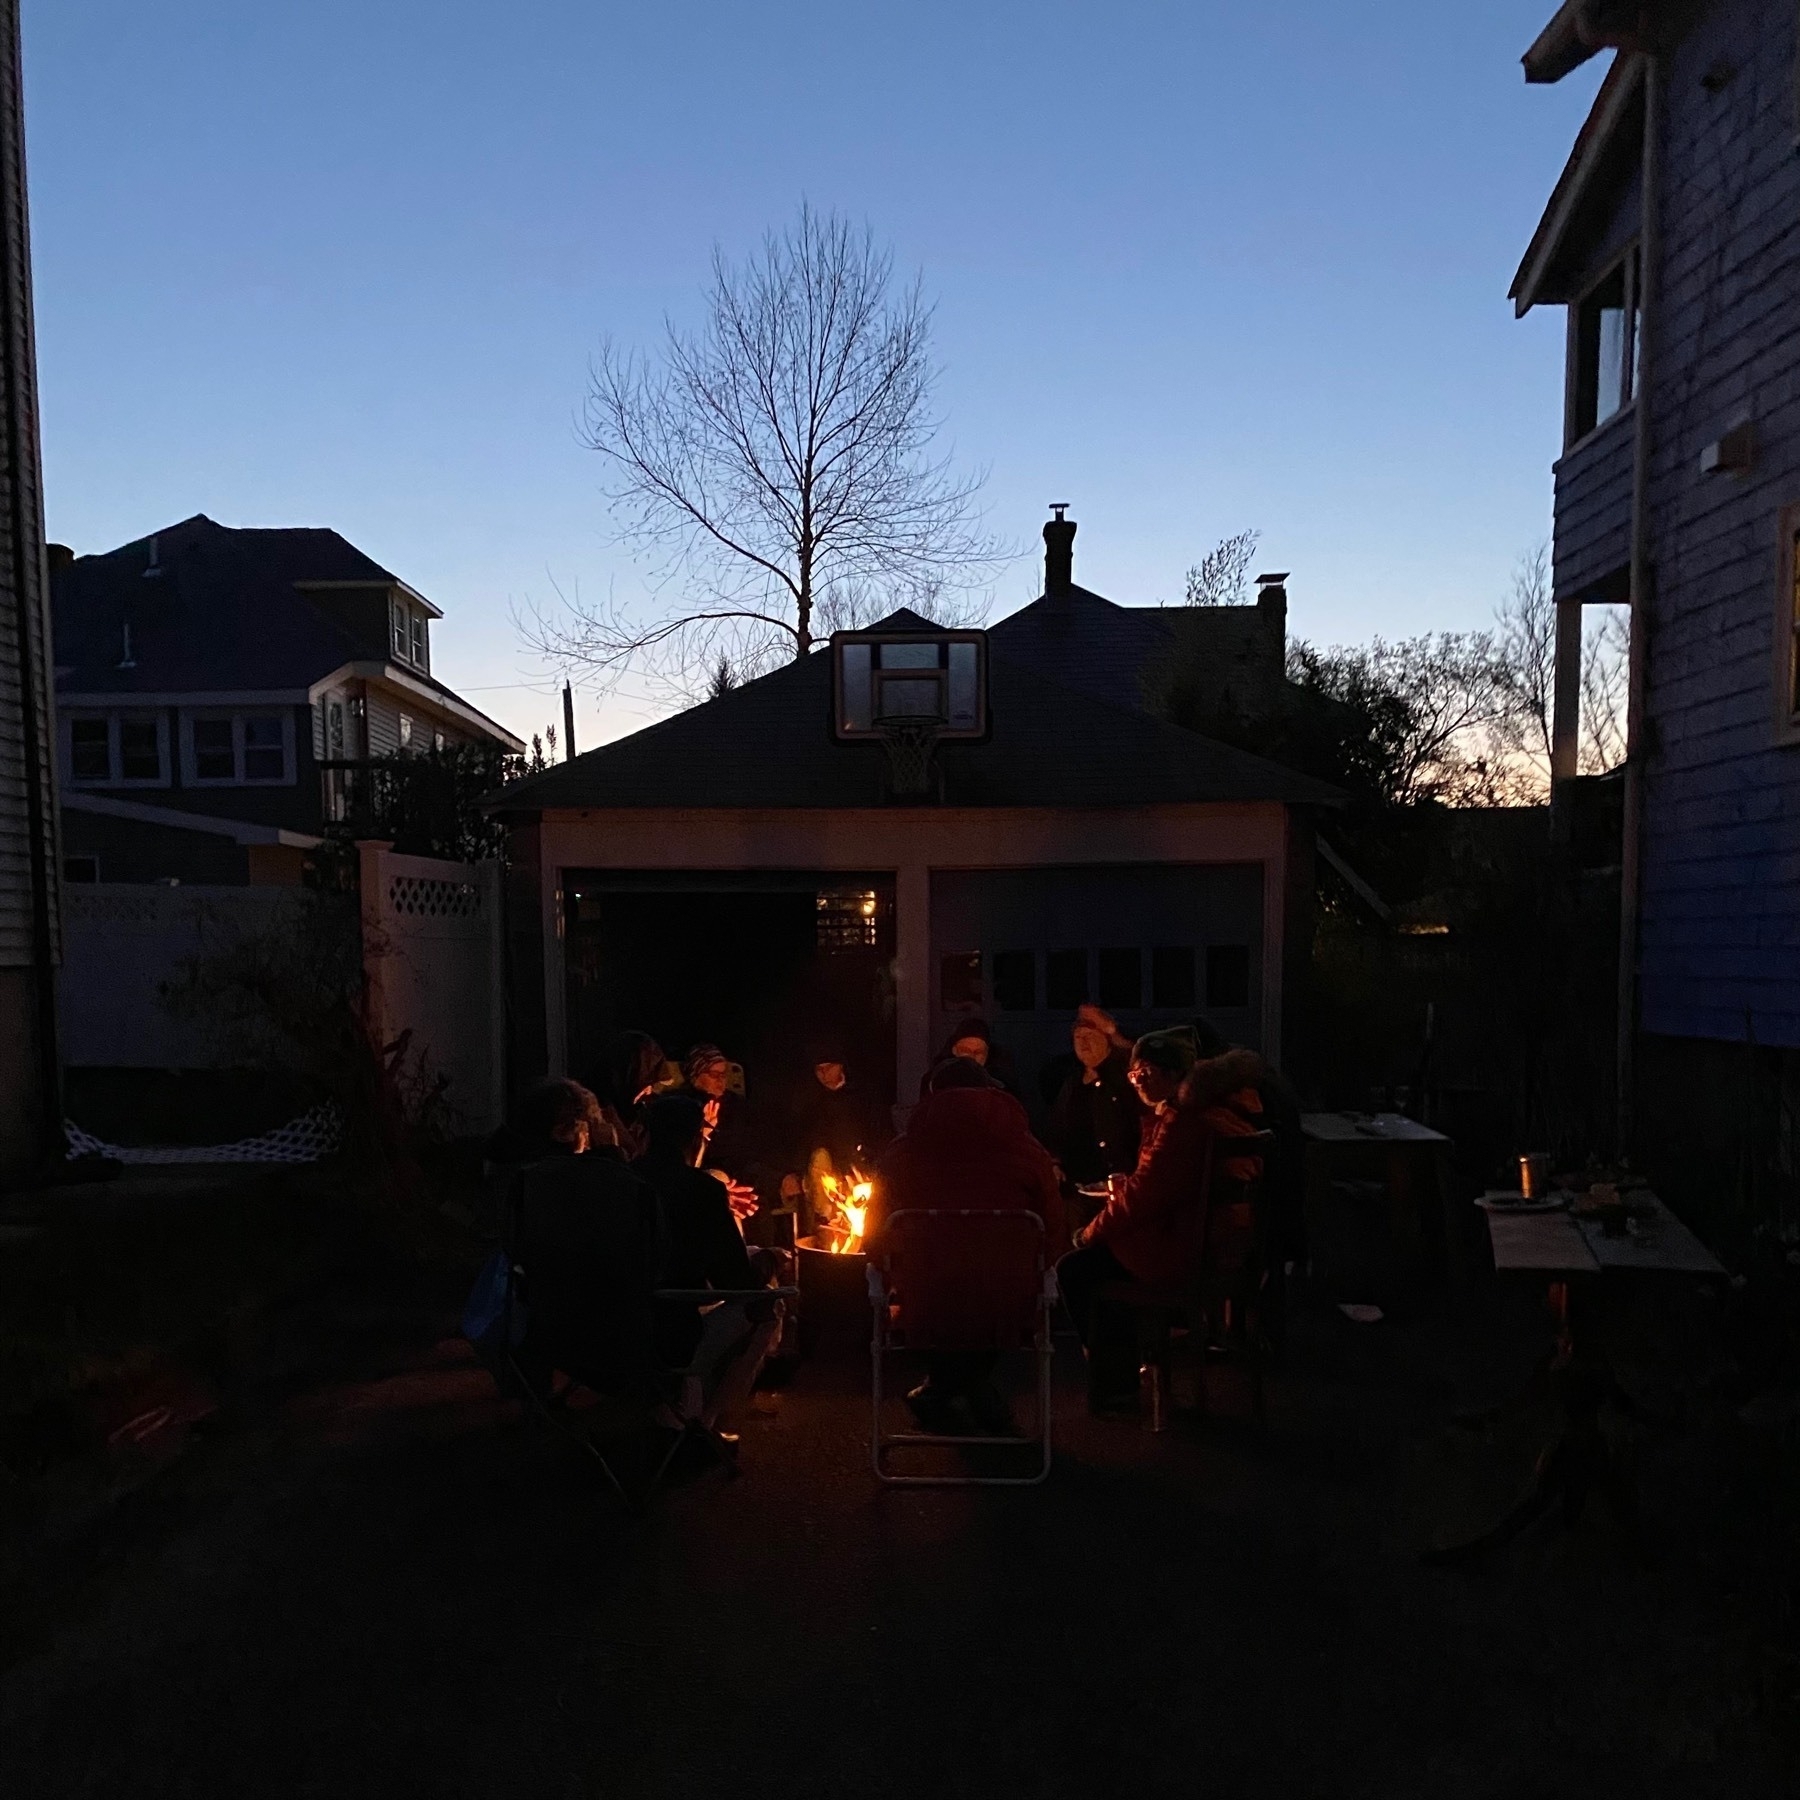 Evening view of people around a small fire with the pale blue sky in the background.